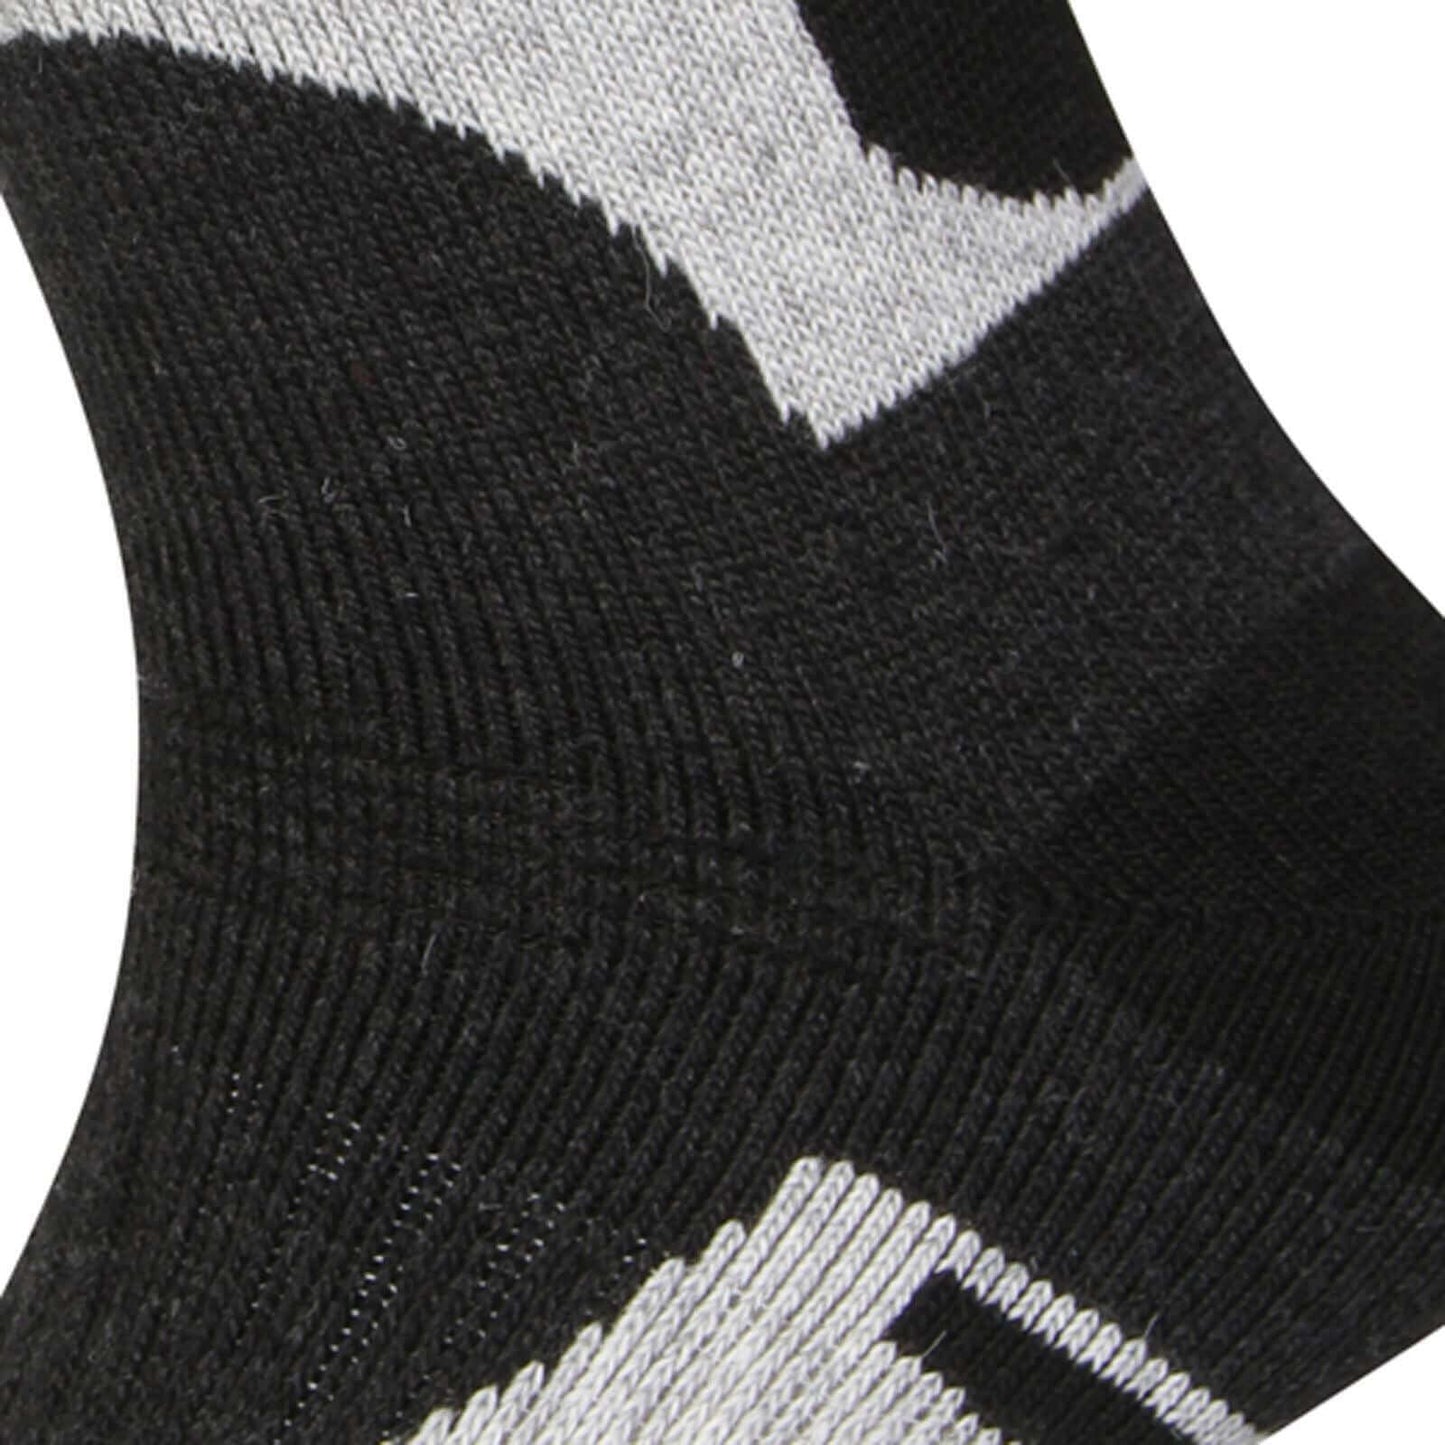 3 Pairs Of Men's Wool Hike Trekking Socks, Outdoor Walking Work Boot Socks, S05. Buy now for £6.00. A Socks by Sock Stack. 6-11, assorted, athletics, boot, boot socks, boys, boys socks, breathable, comfortable, cosy, footwear, gym, hiking, holidays, mens,